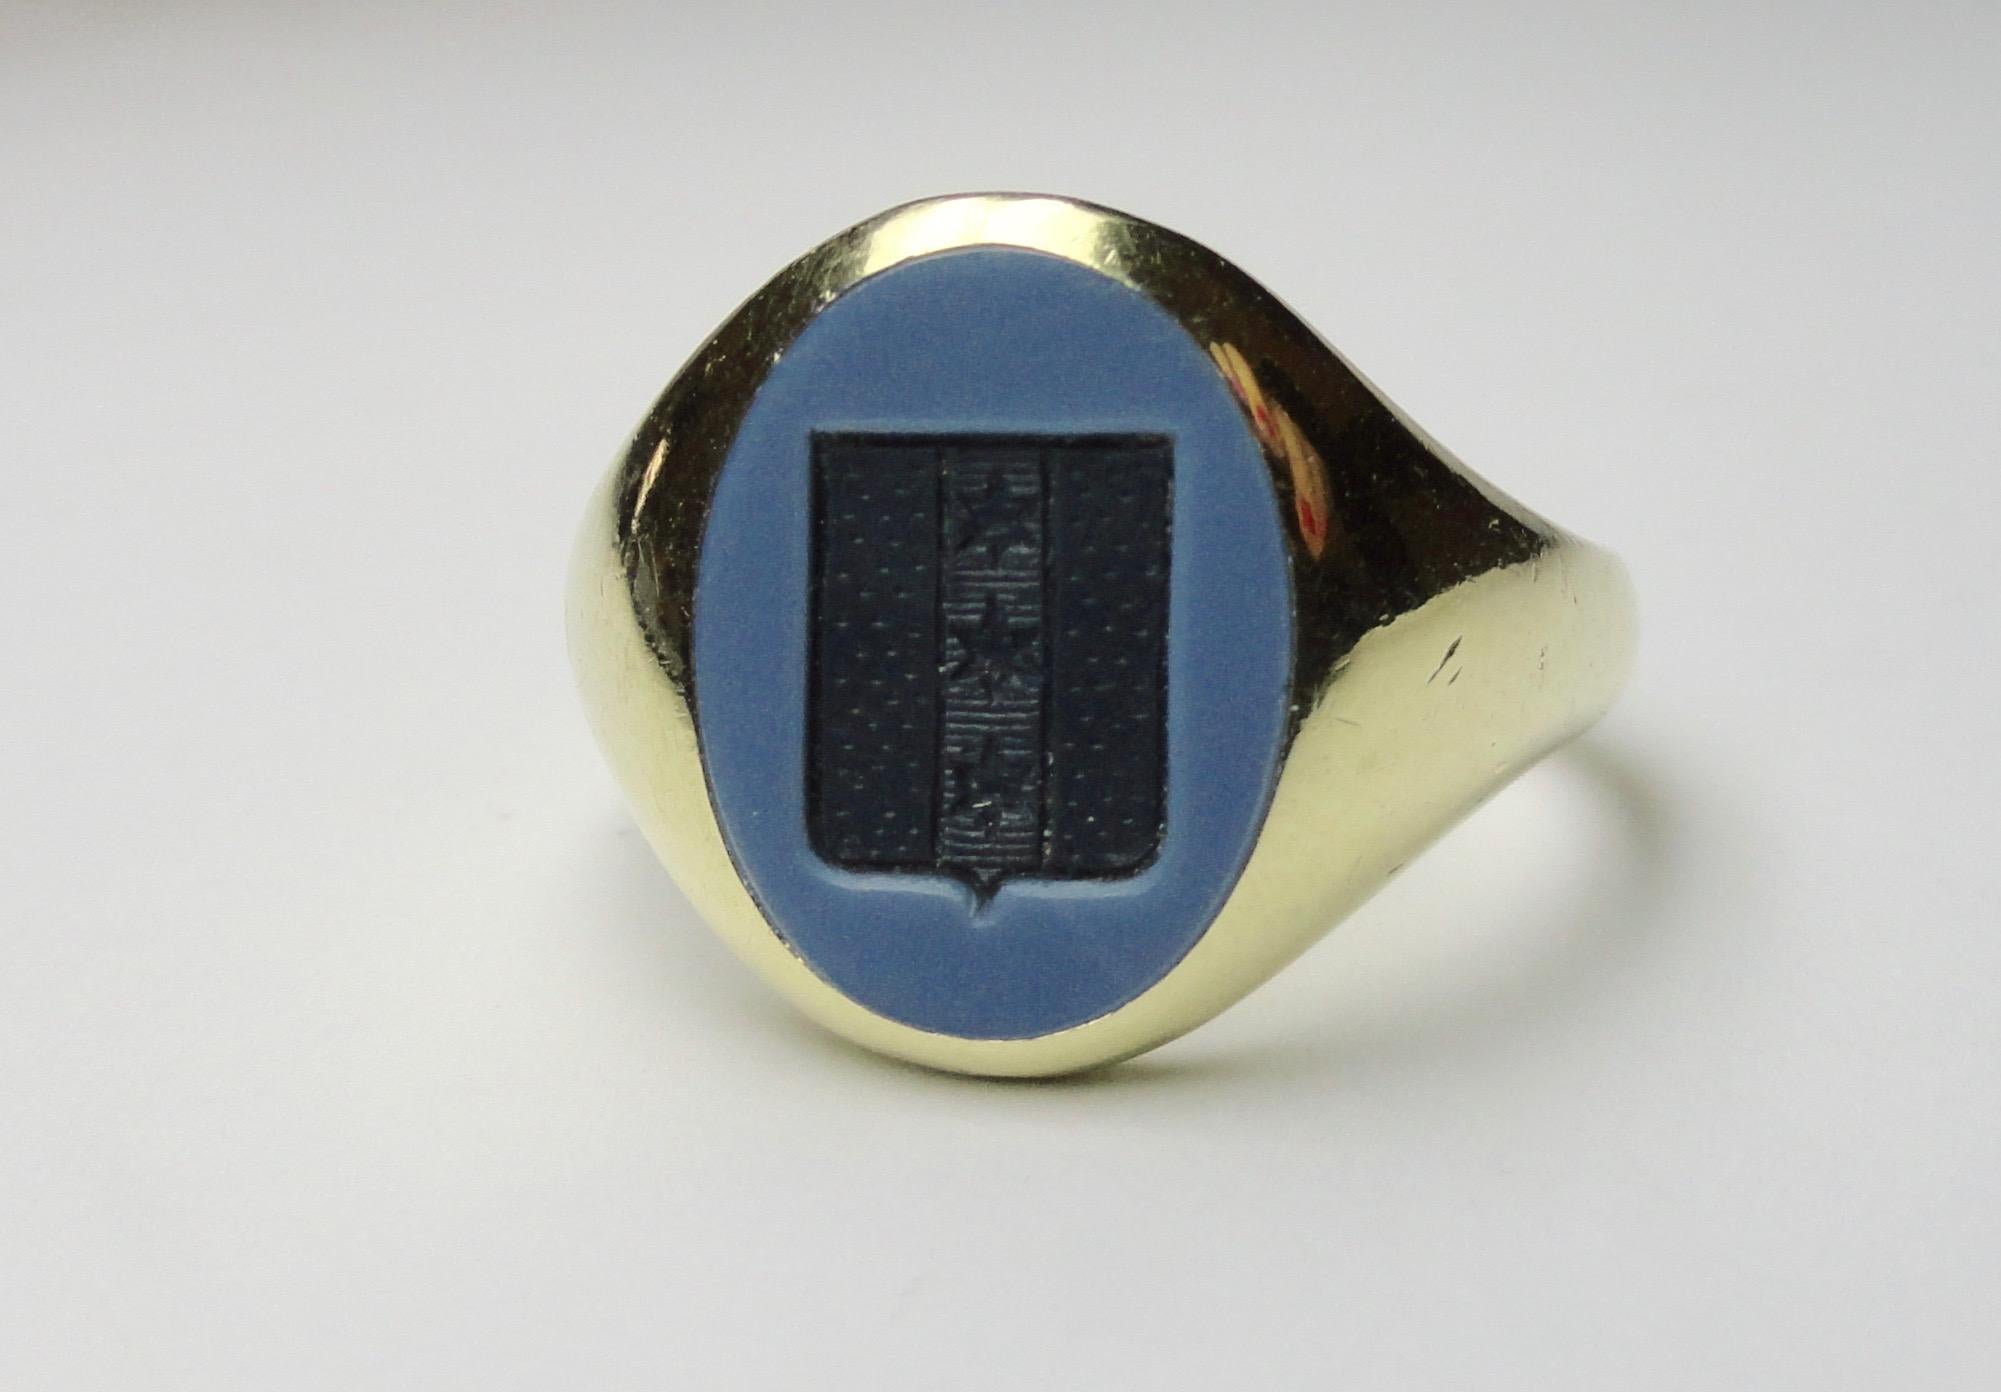 Particular intaglio ring in bicolour agate and set in 14ct gold. Probably of American provenance and from the beginning of the 1900's.
